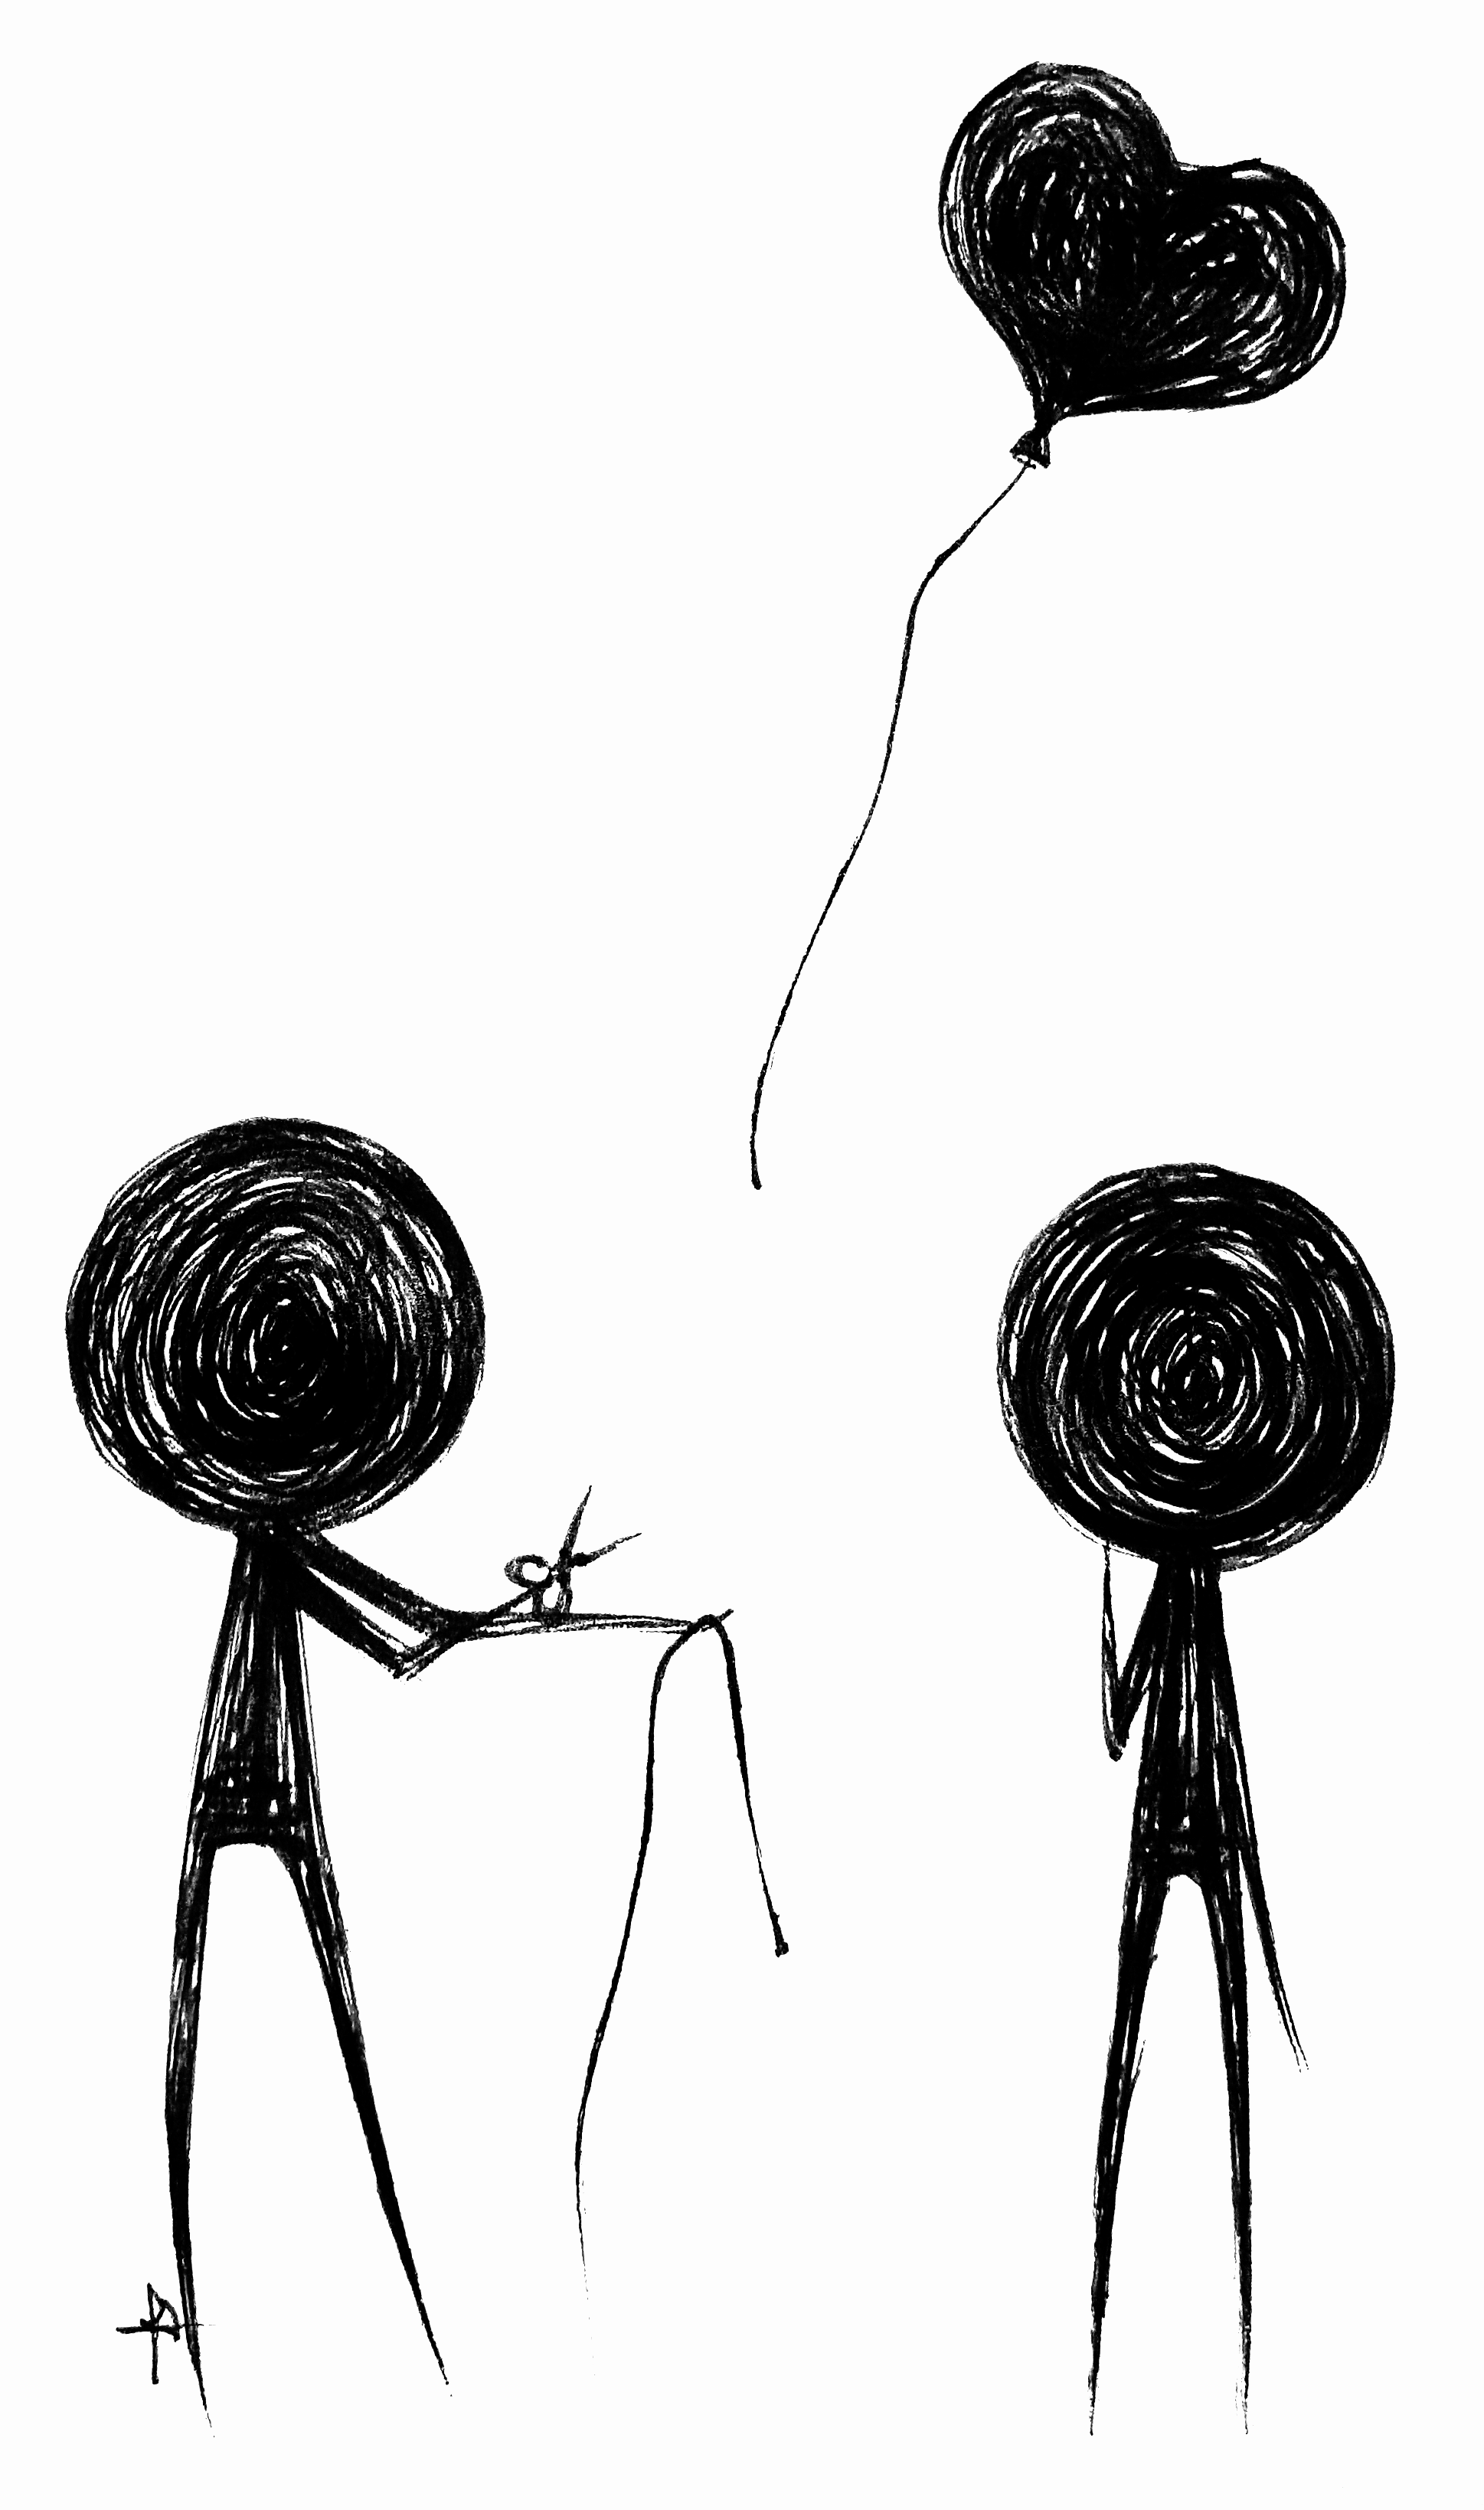 Sketch of two stick figures; one releases a heart-shaped balloon after cutting its string, while the other watches in disbelief.